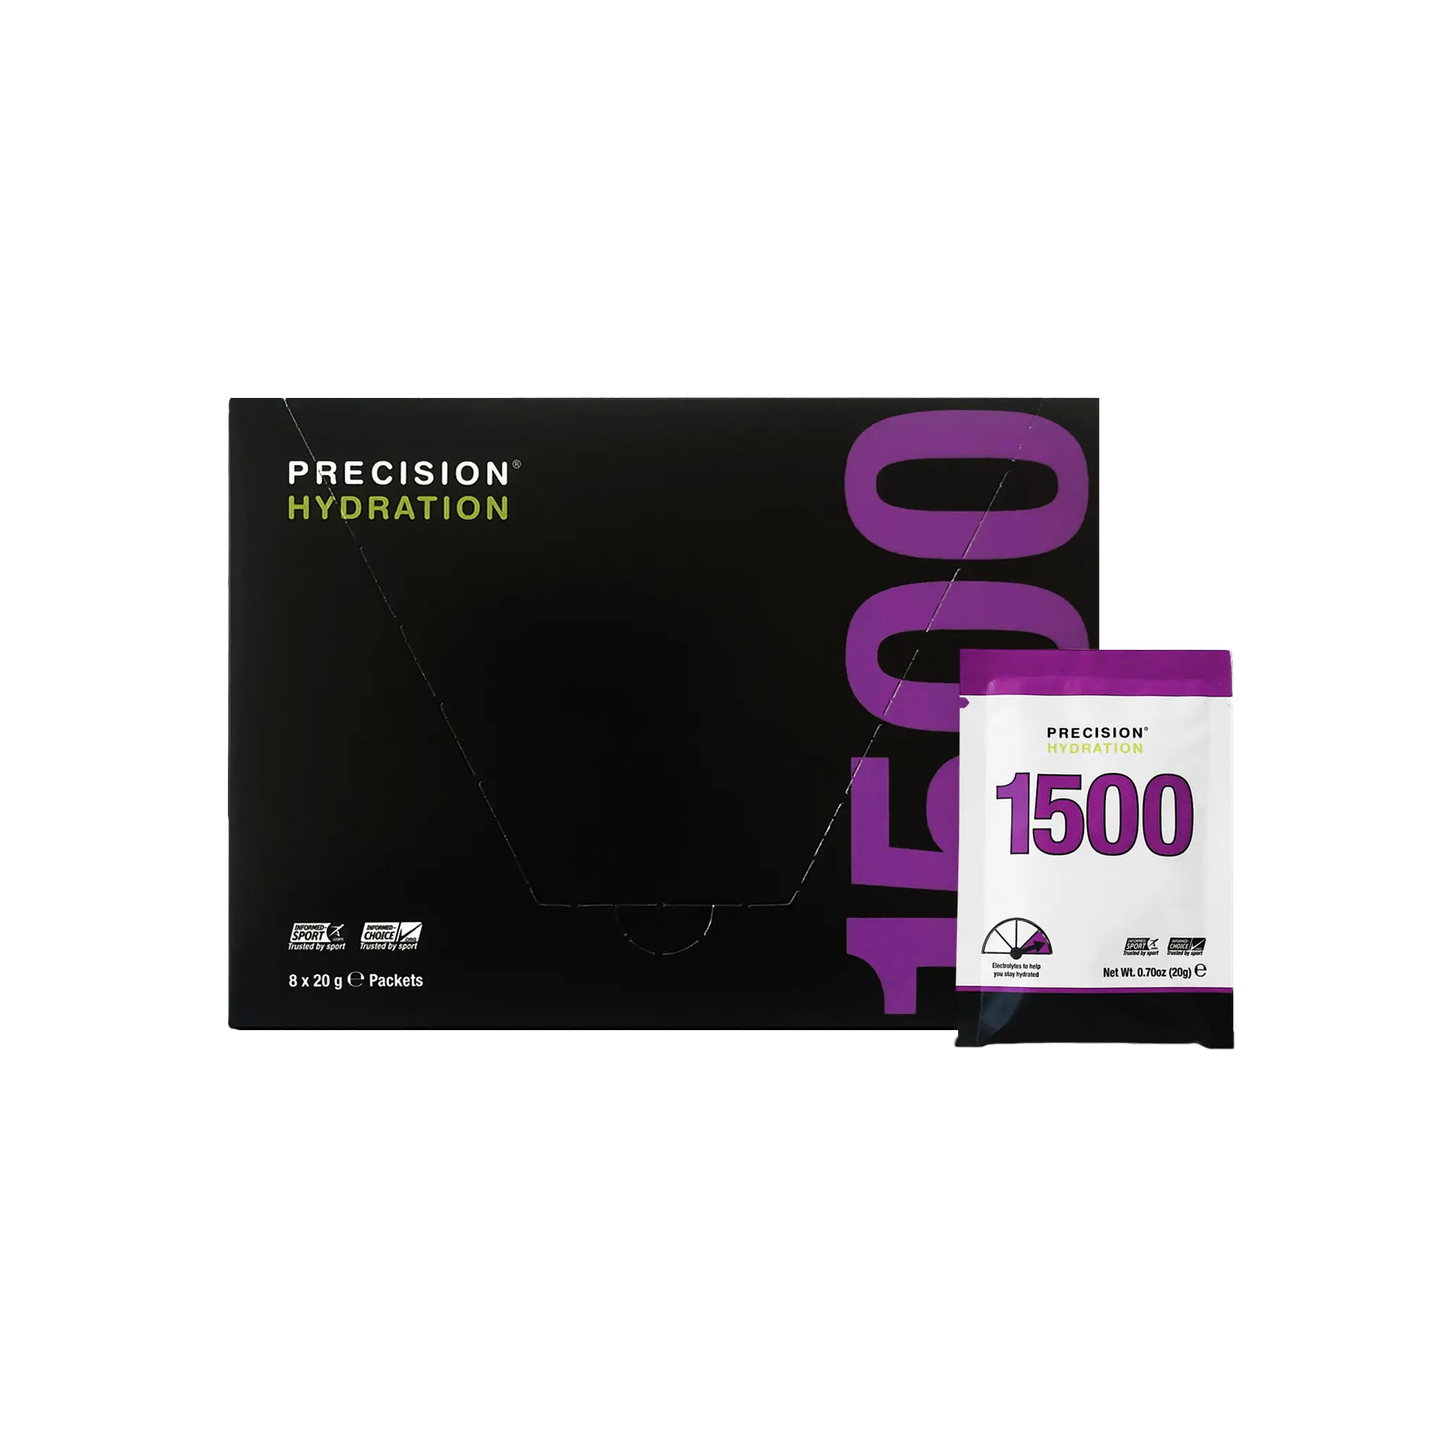 Precision Hydration 1500 Powder - Box of 8 packets